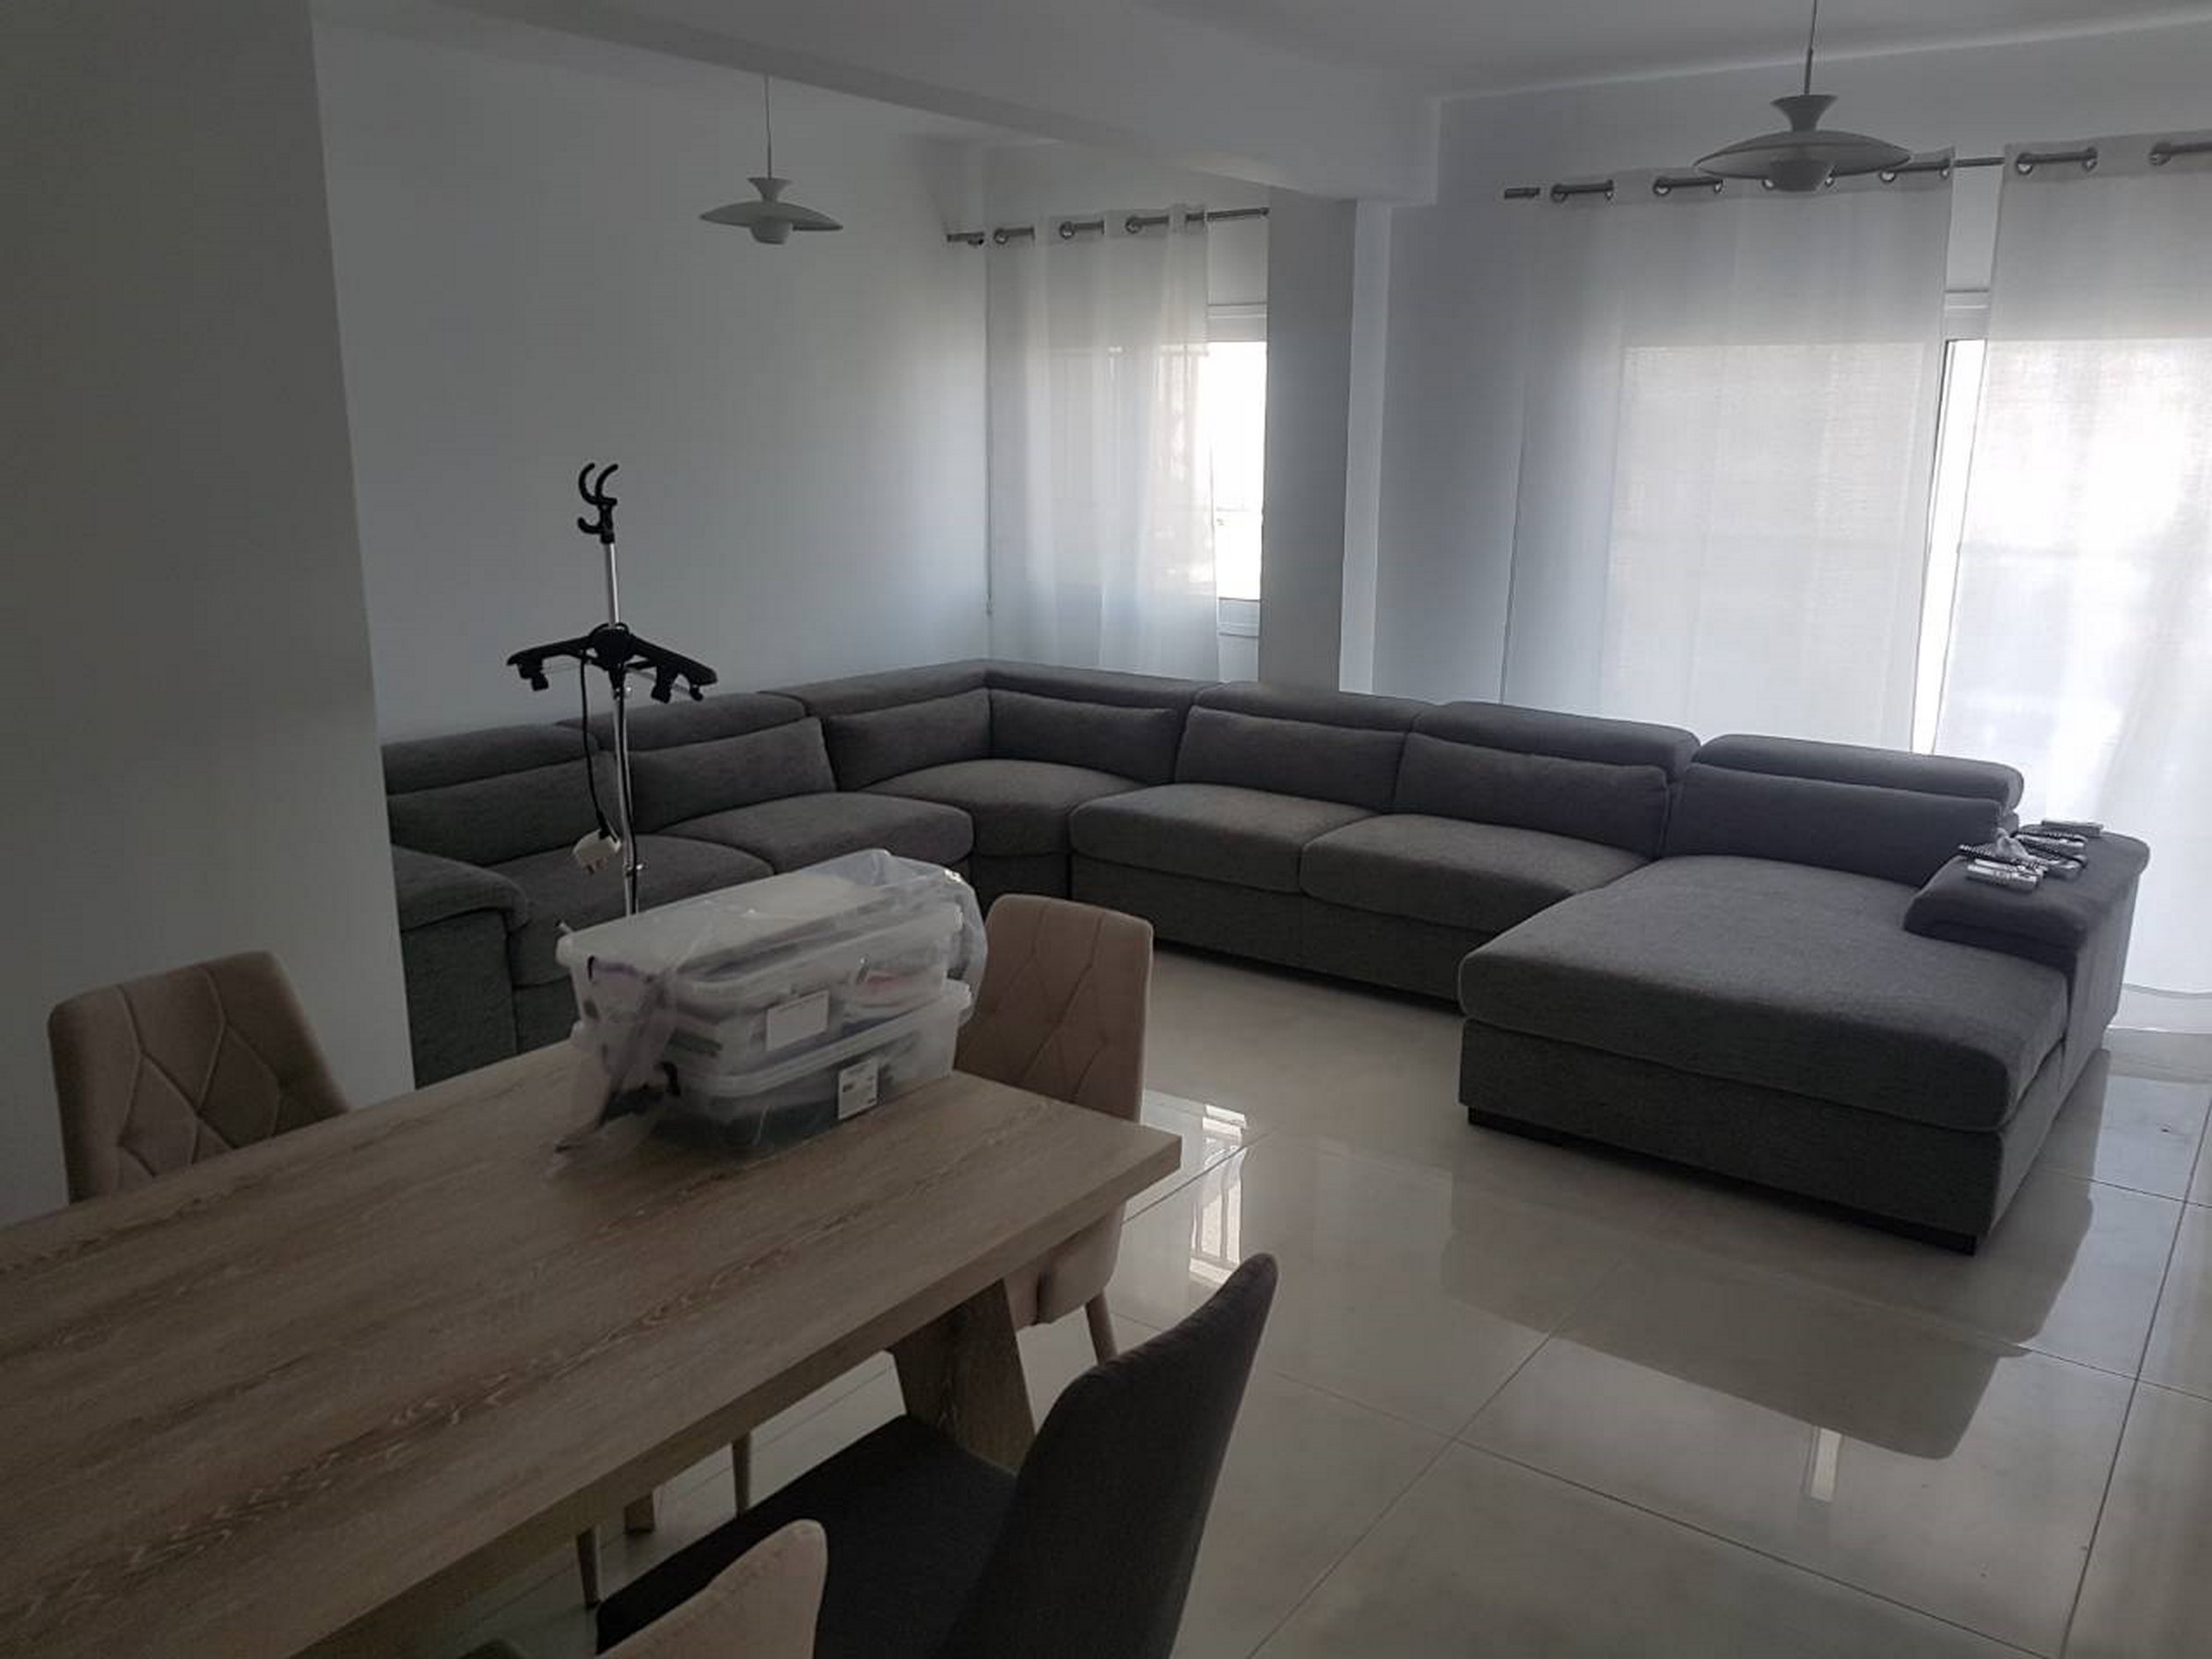 Apartment - 3 bedroom for long term rent, Makarios Avenue, Limassol